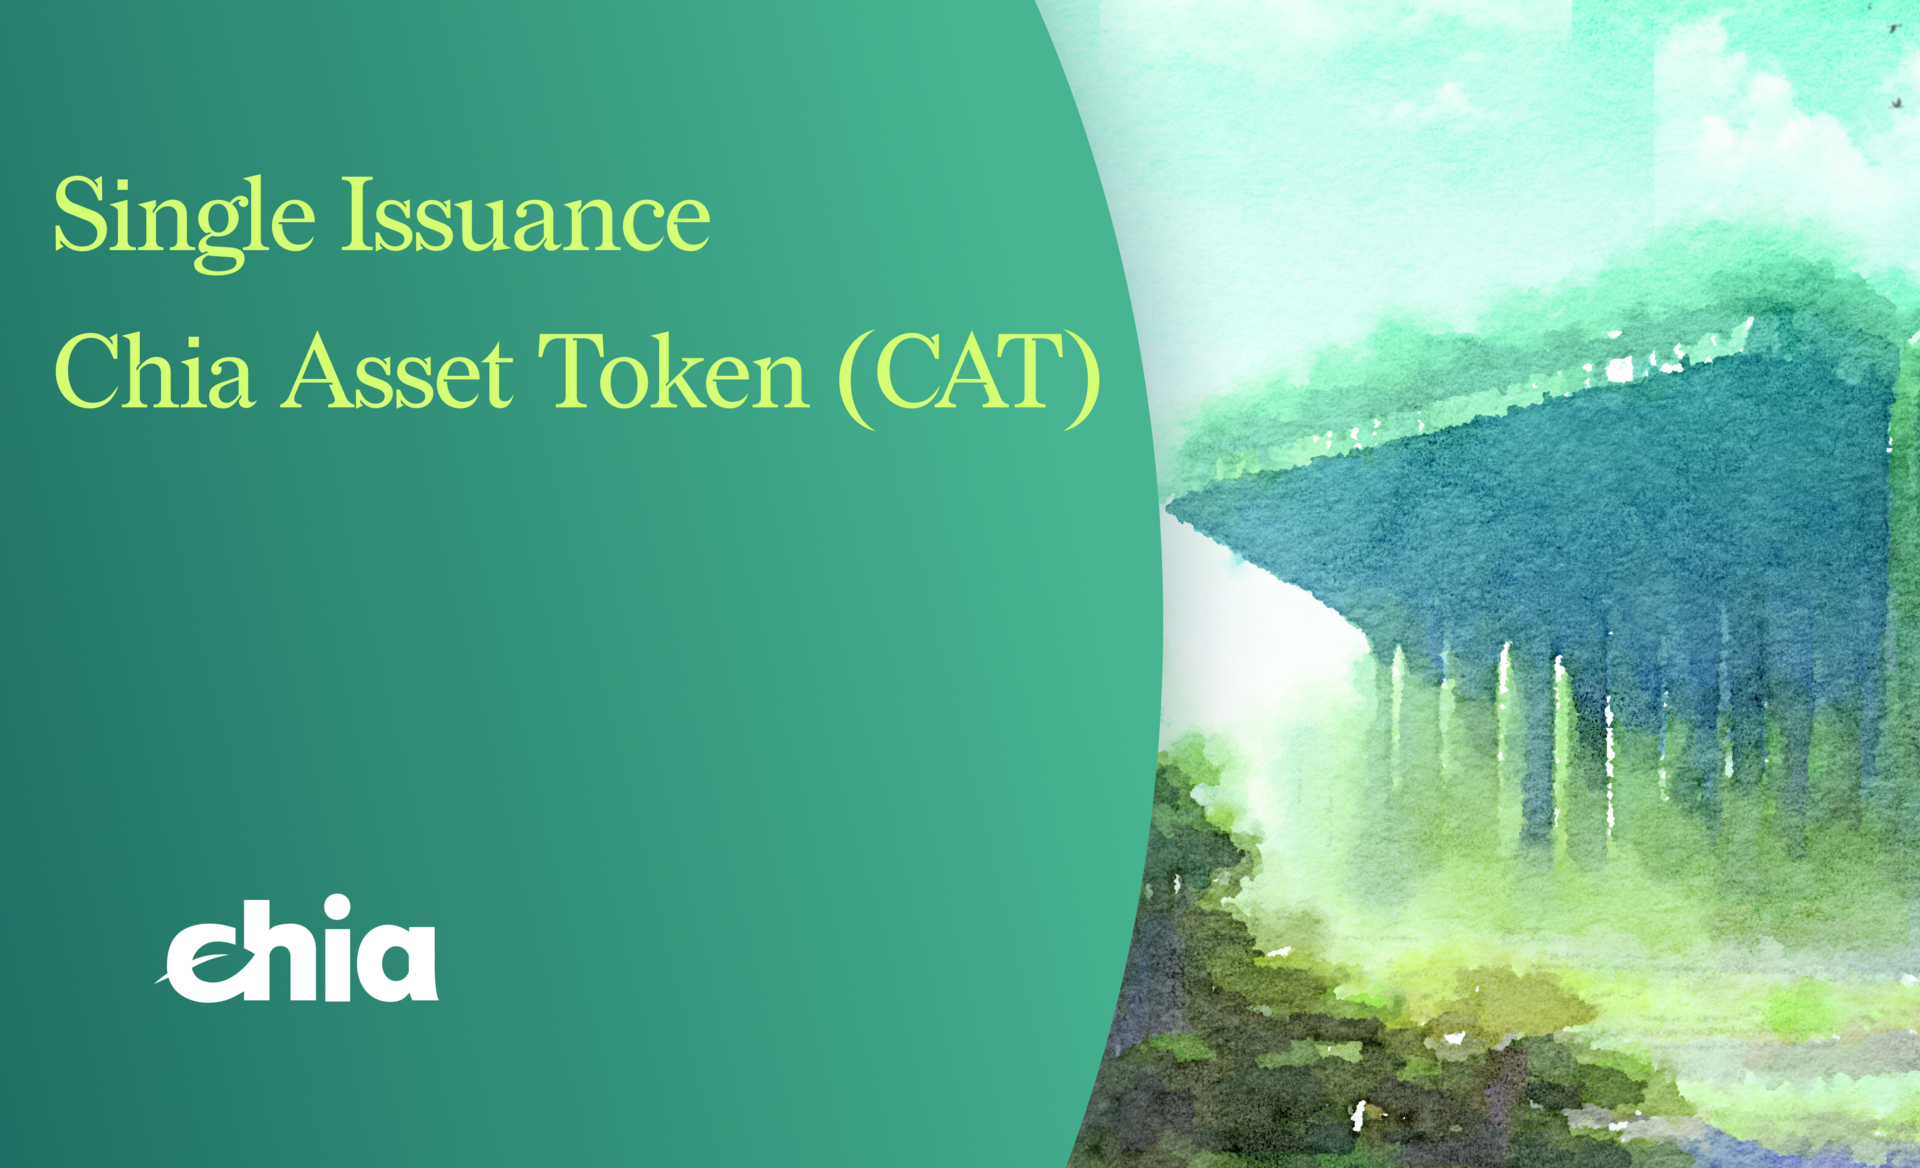 Single Issuance CATs